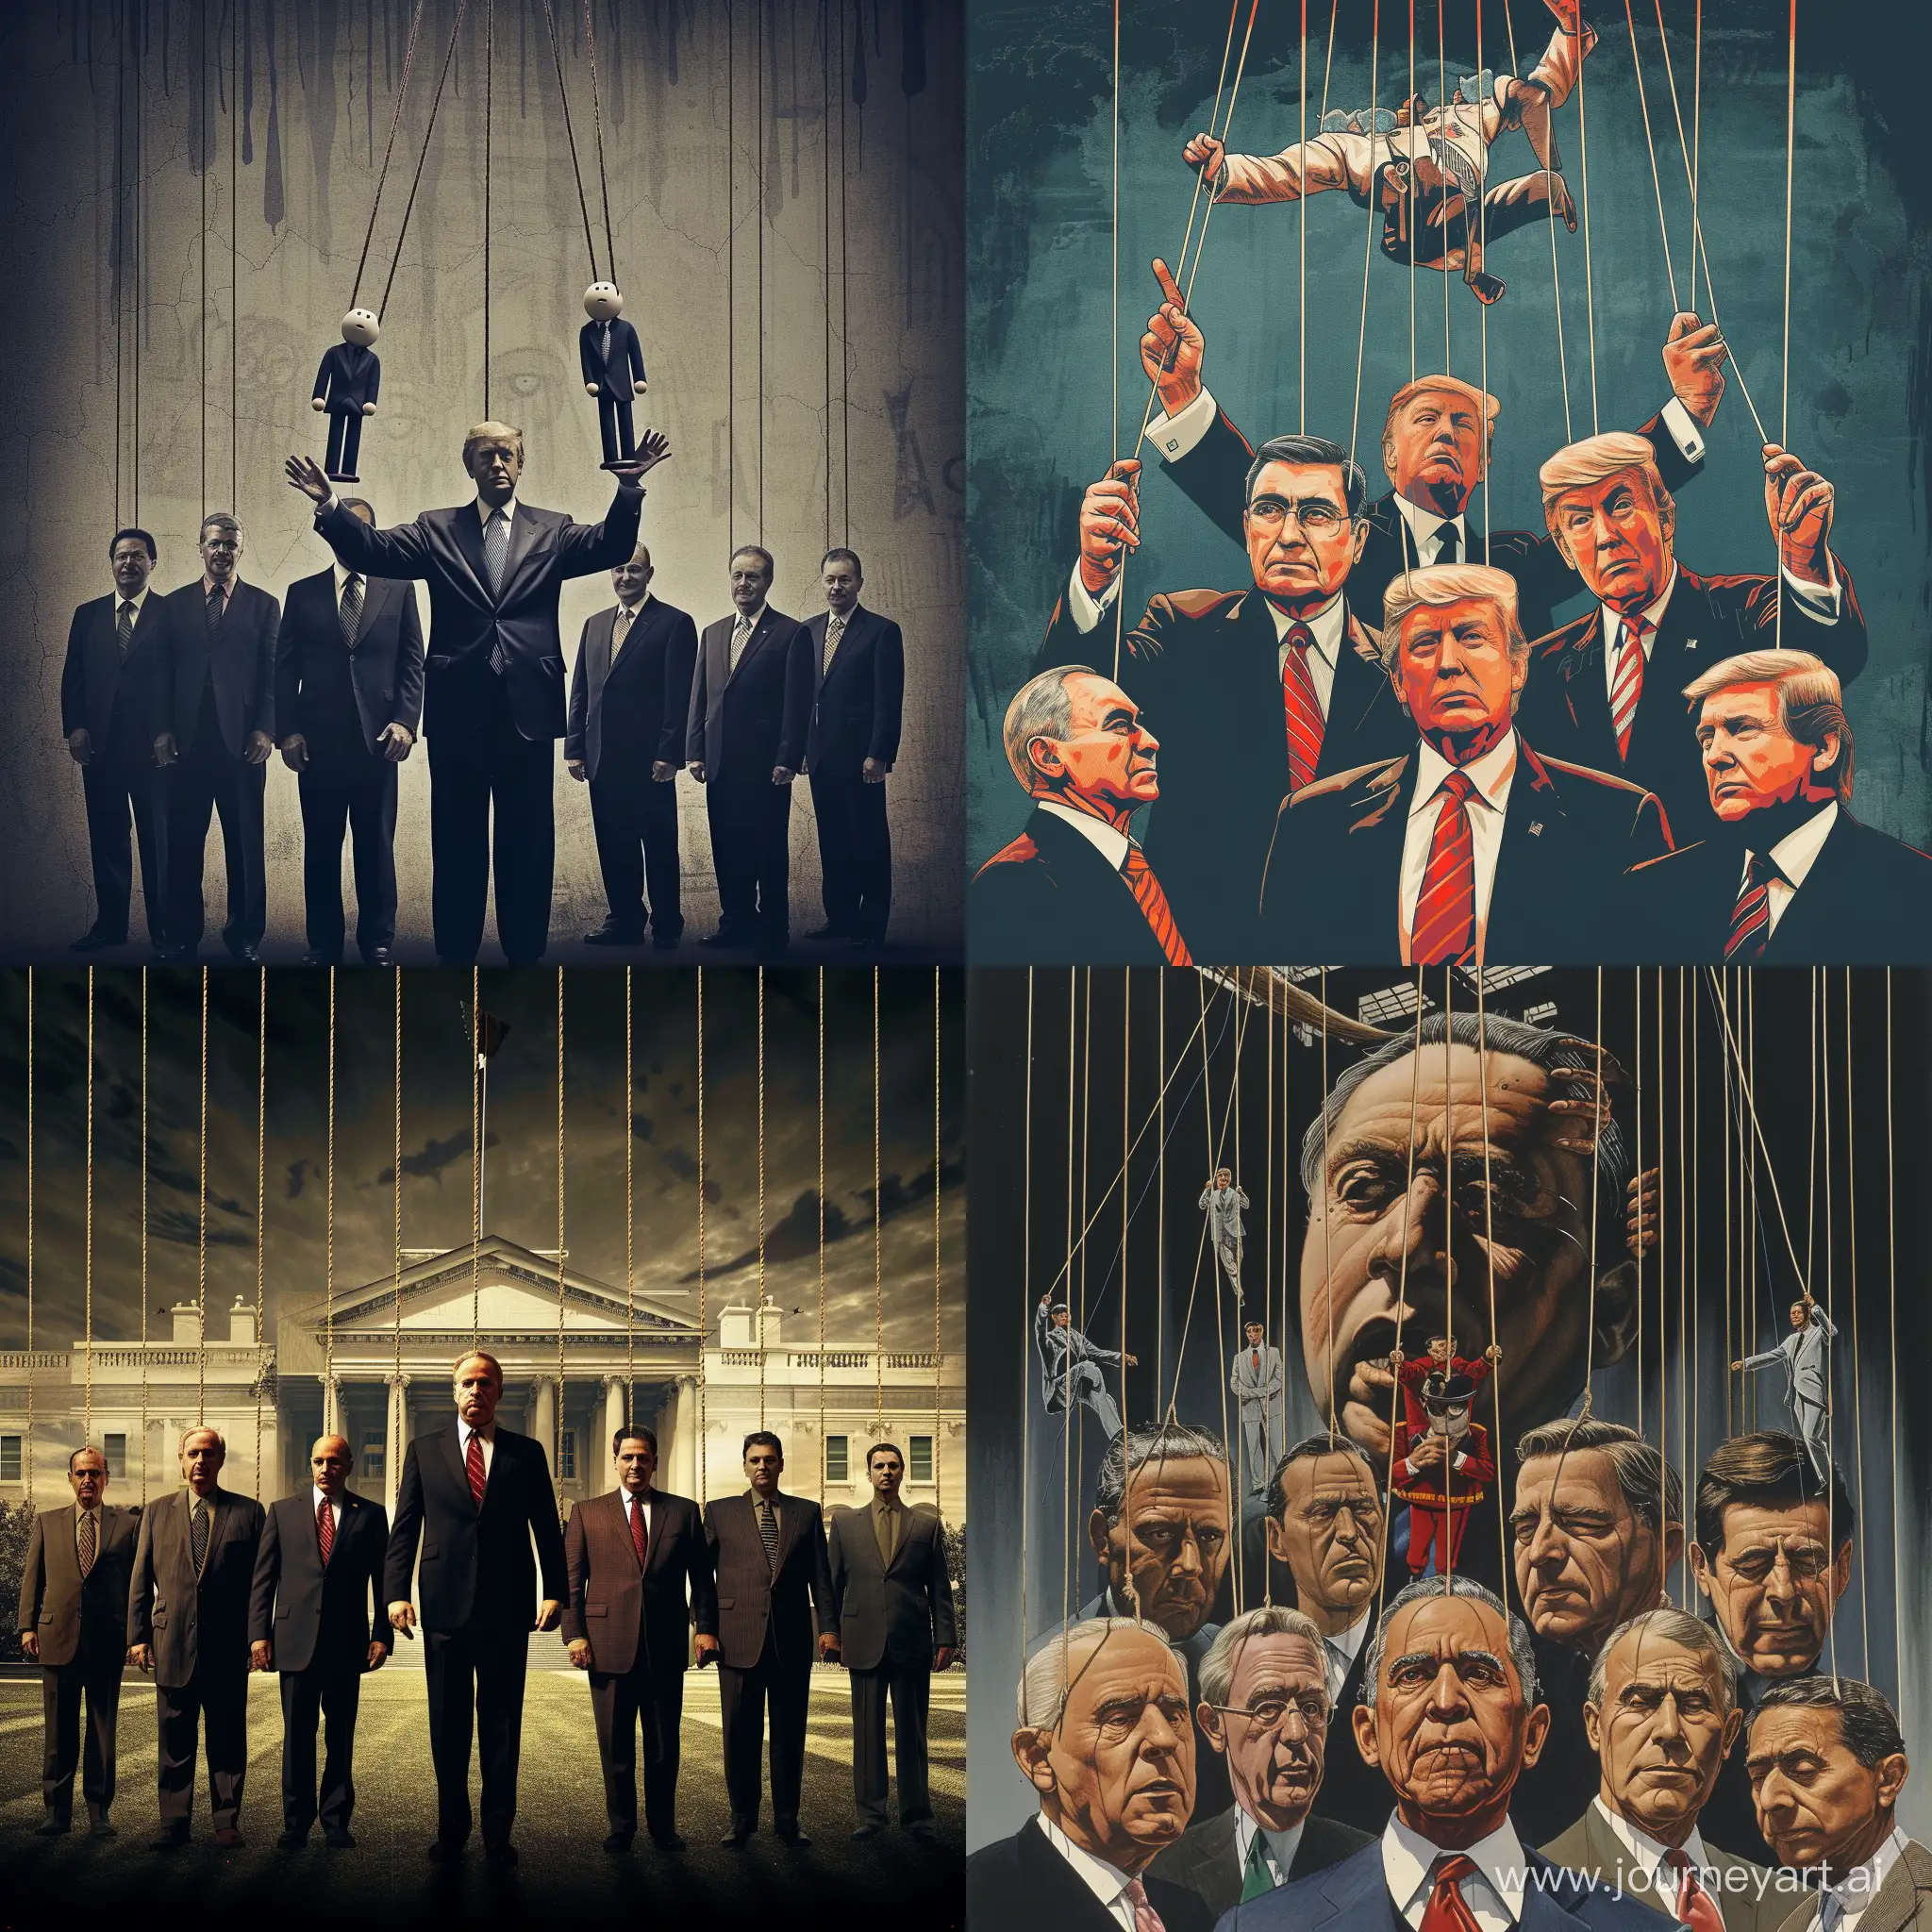 us government controlling other country leaders like puppet show